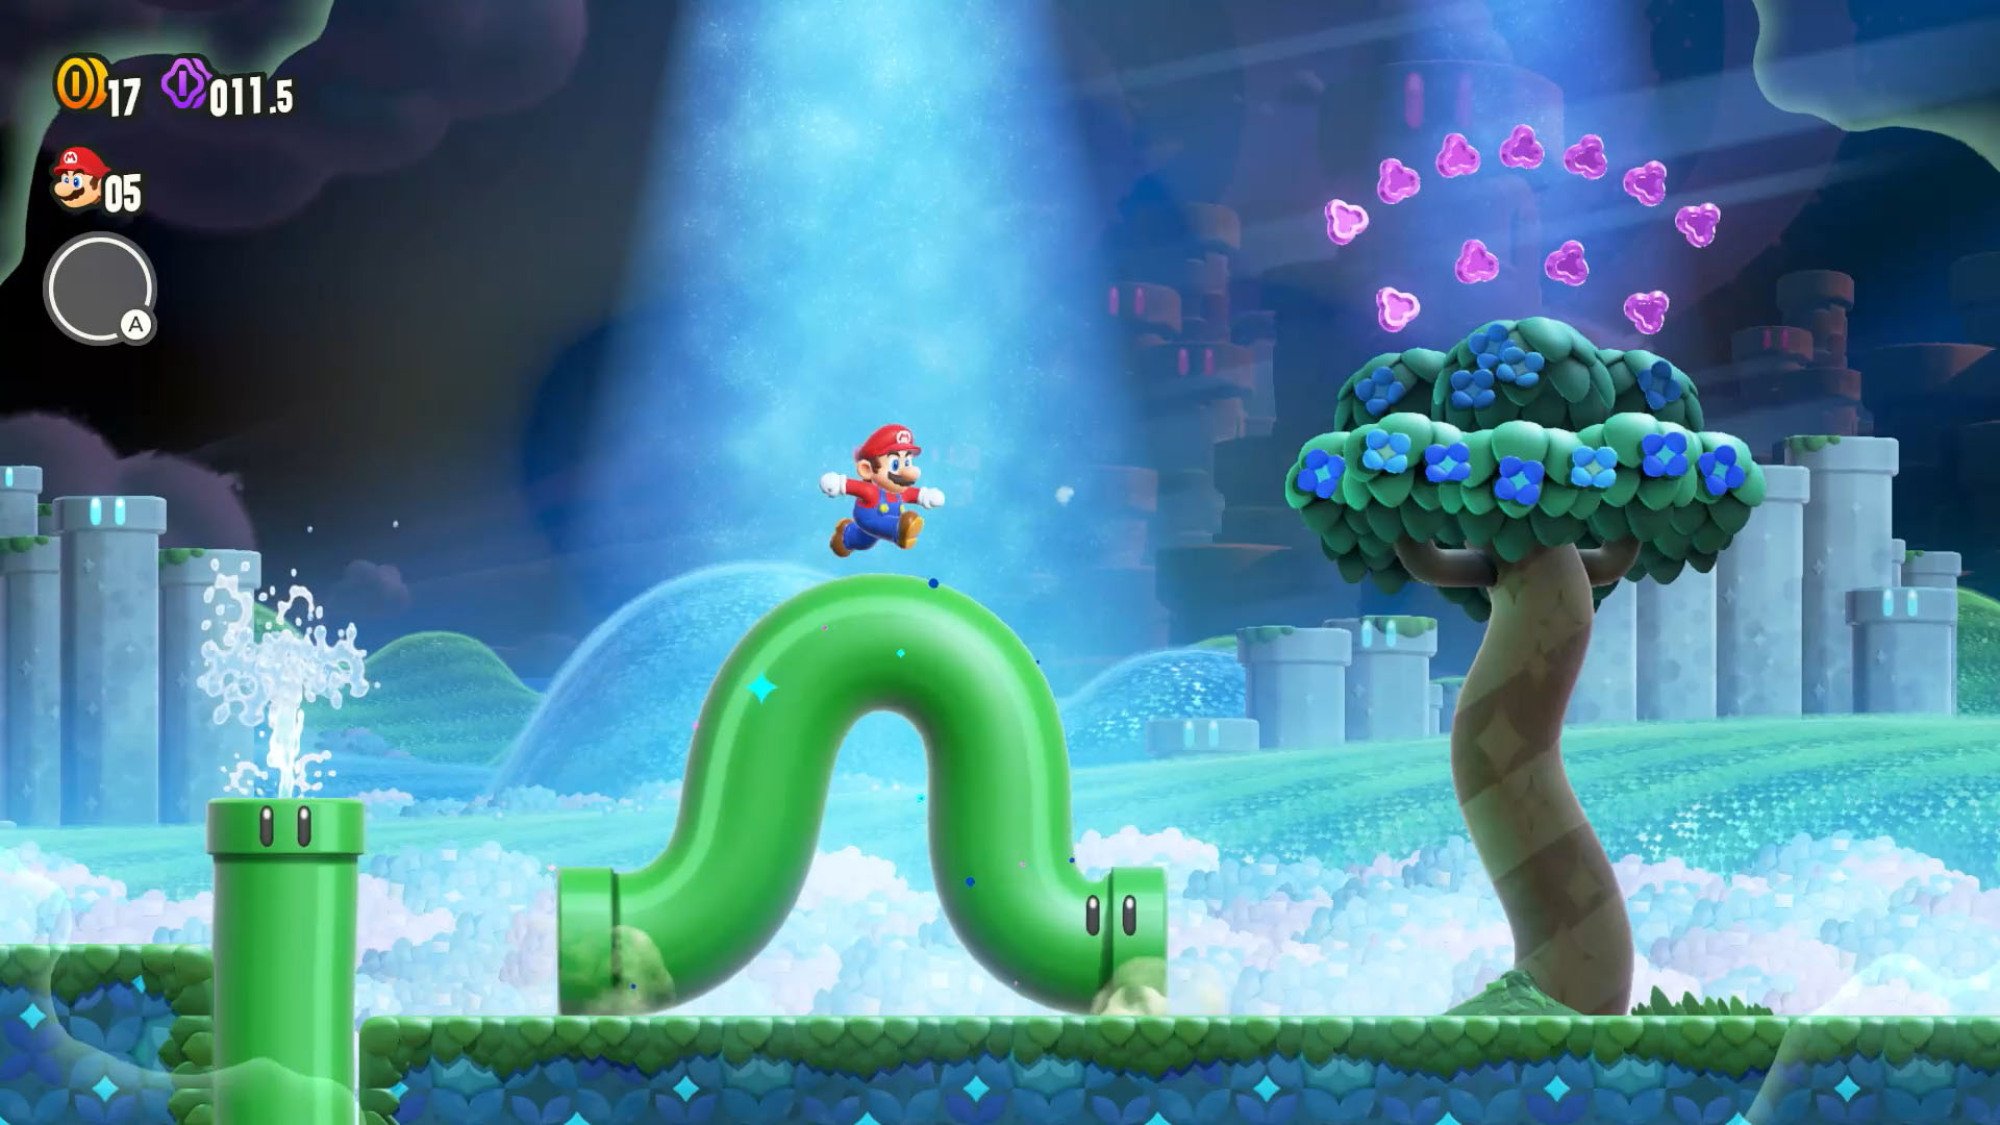 Wonder Effect with snake pipes in Mario Wonder